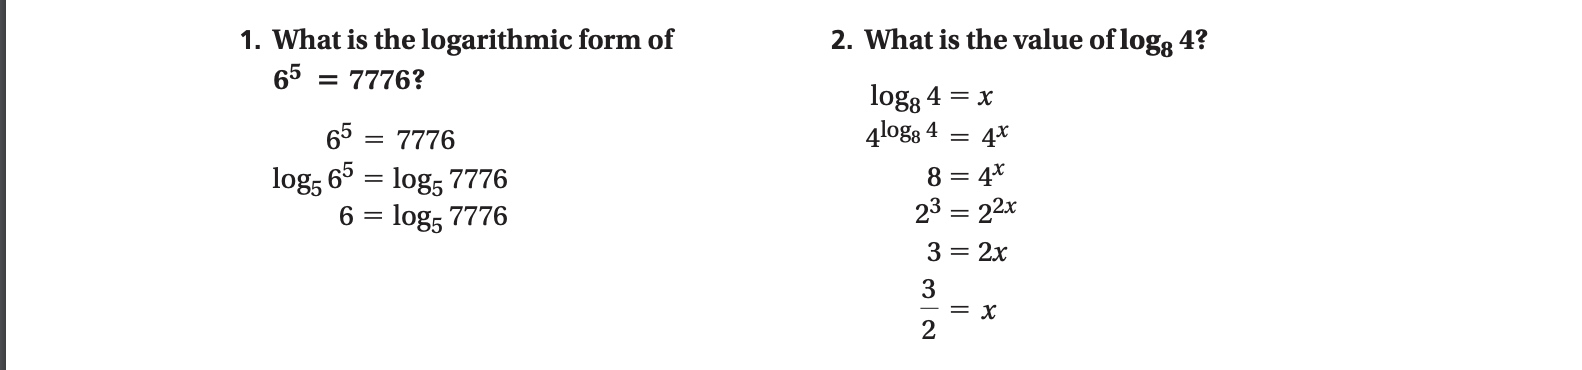 2. What is the value of log8 4?
1. What is the logarithmic form of
65 = 7776?
logg 4 = x
4logg 4
65
4*
= 7776
65 = log, 7776
log5
6 = log, 7776
8 = 4*
23 = 22x
3 = 2x
3
